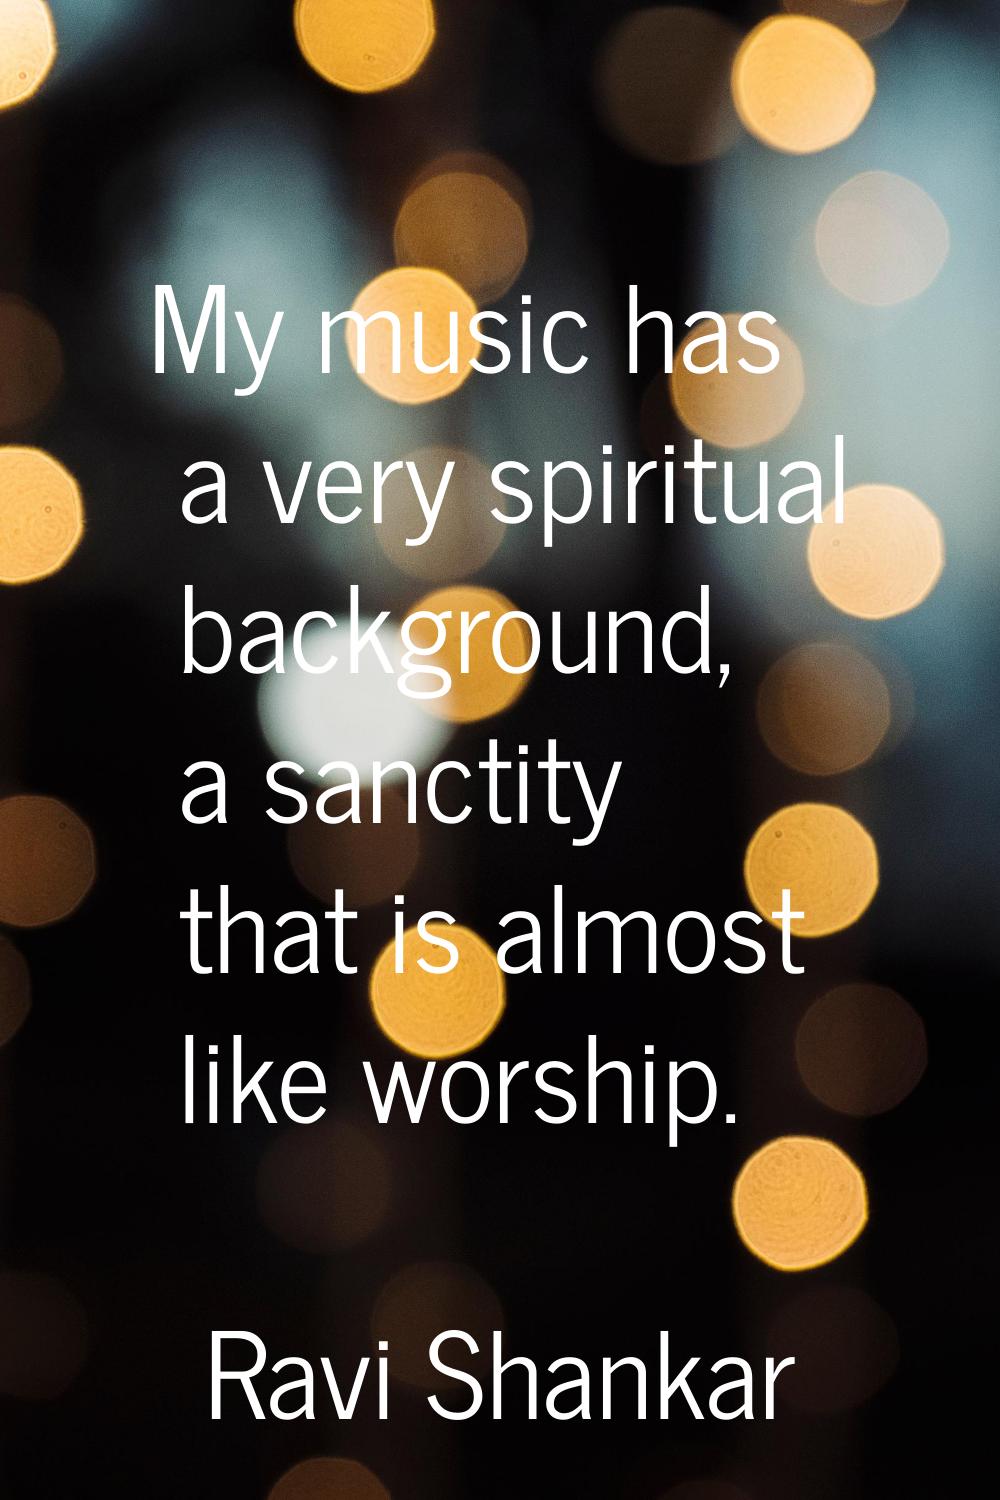 My music has a very spiritual background, a sanctity that is almost like worship.